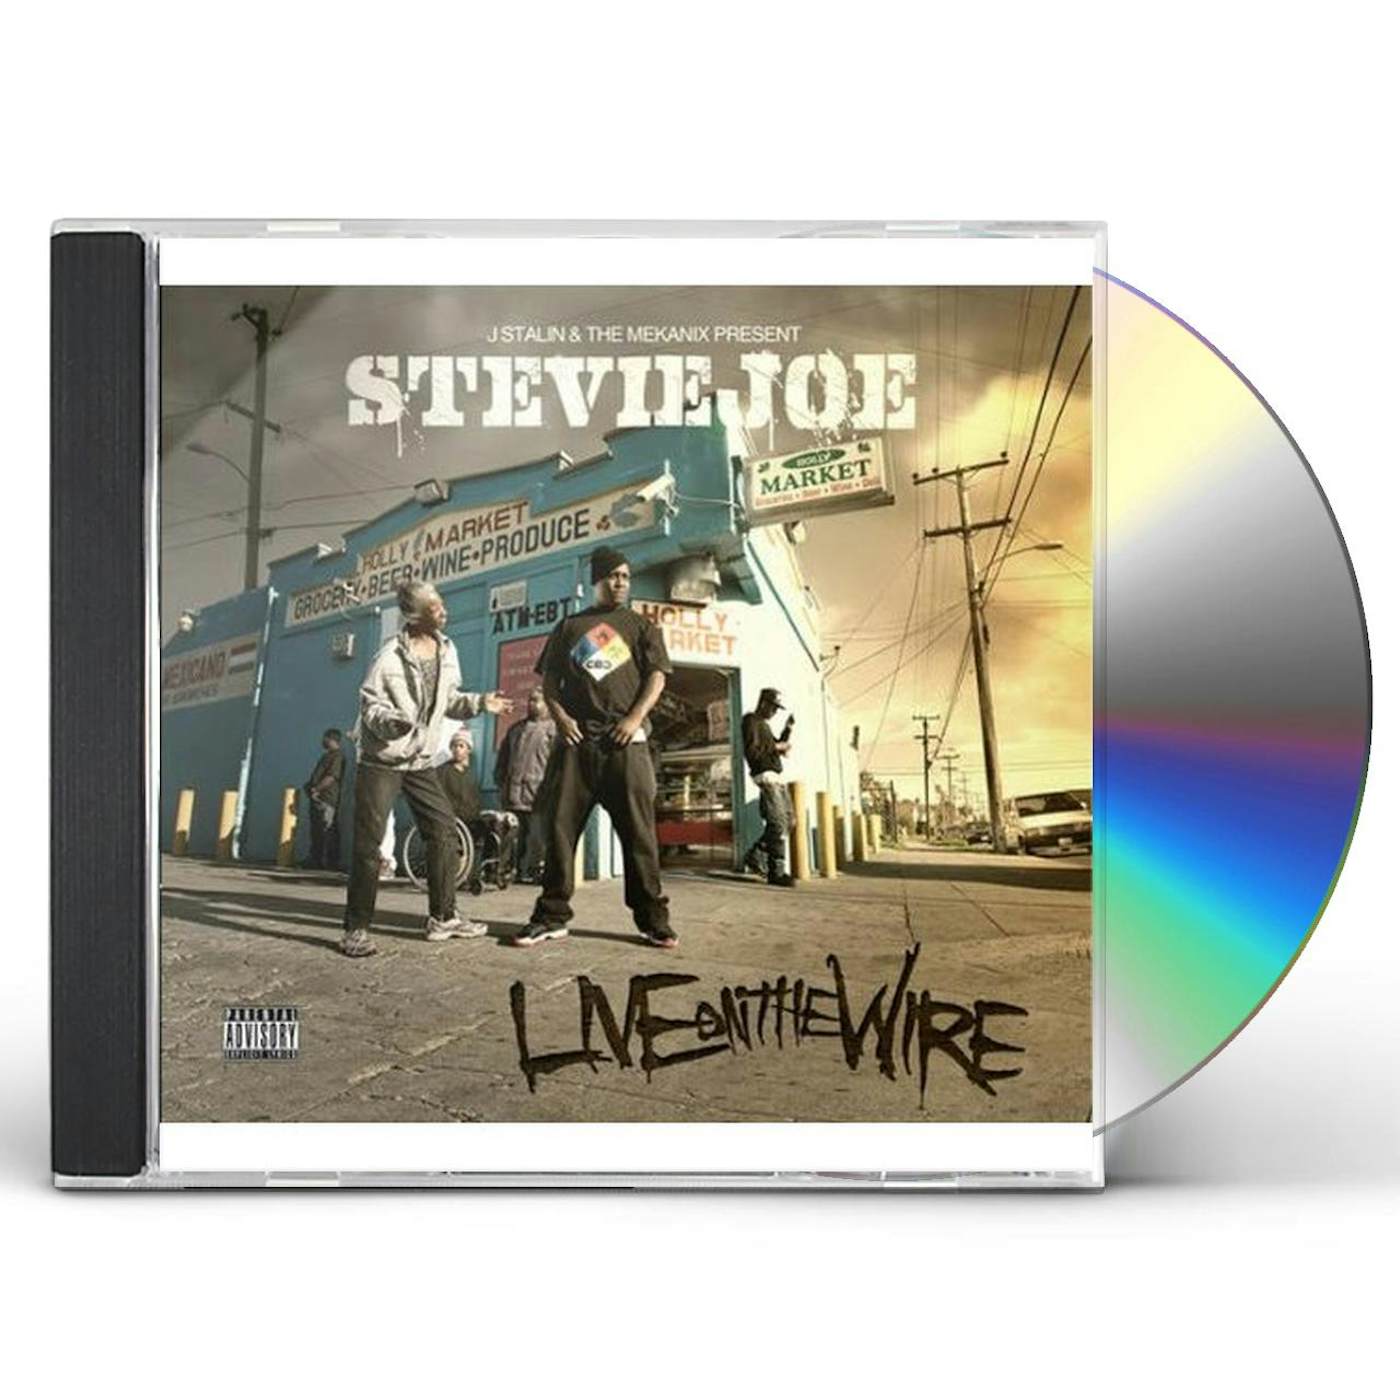 Stevie Joe LIVE ON THE WIRE CD